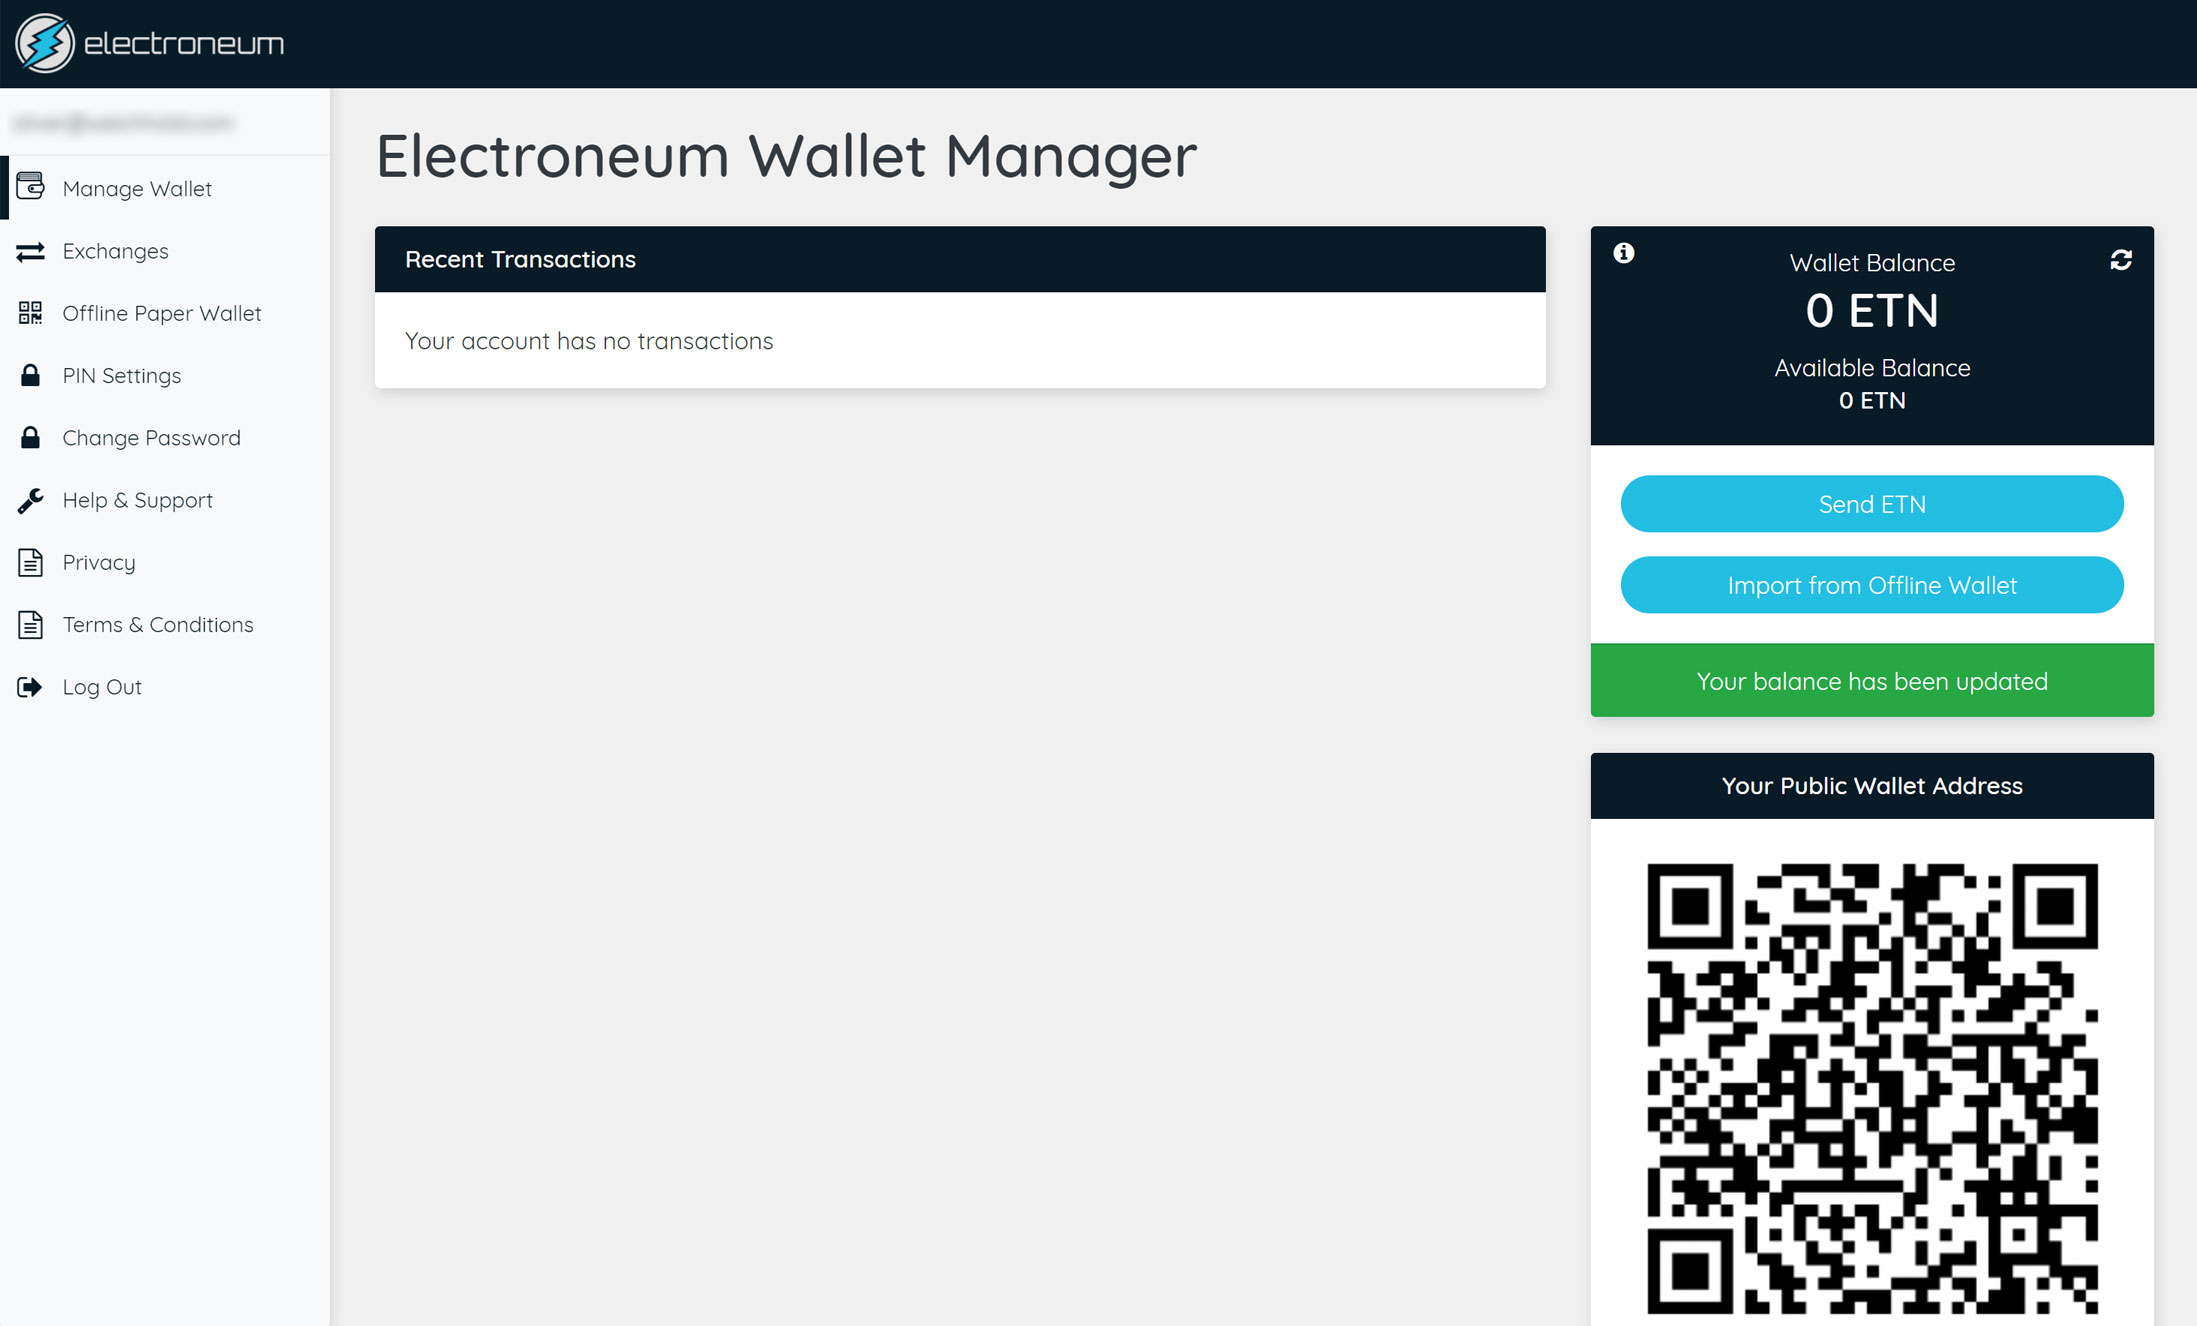 Electroneum Wallet Manager